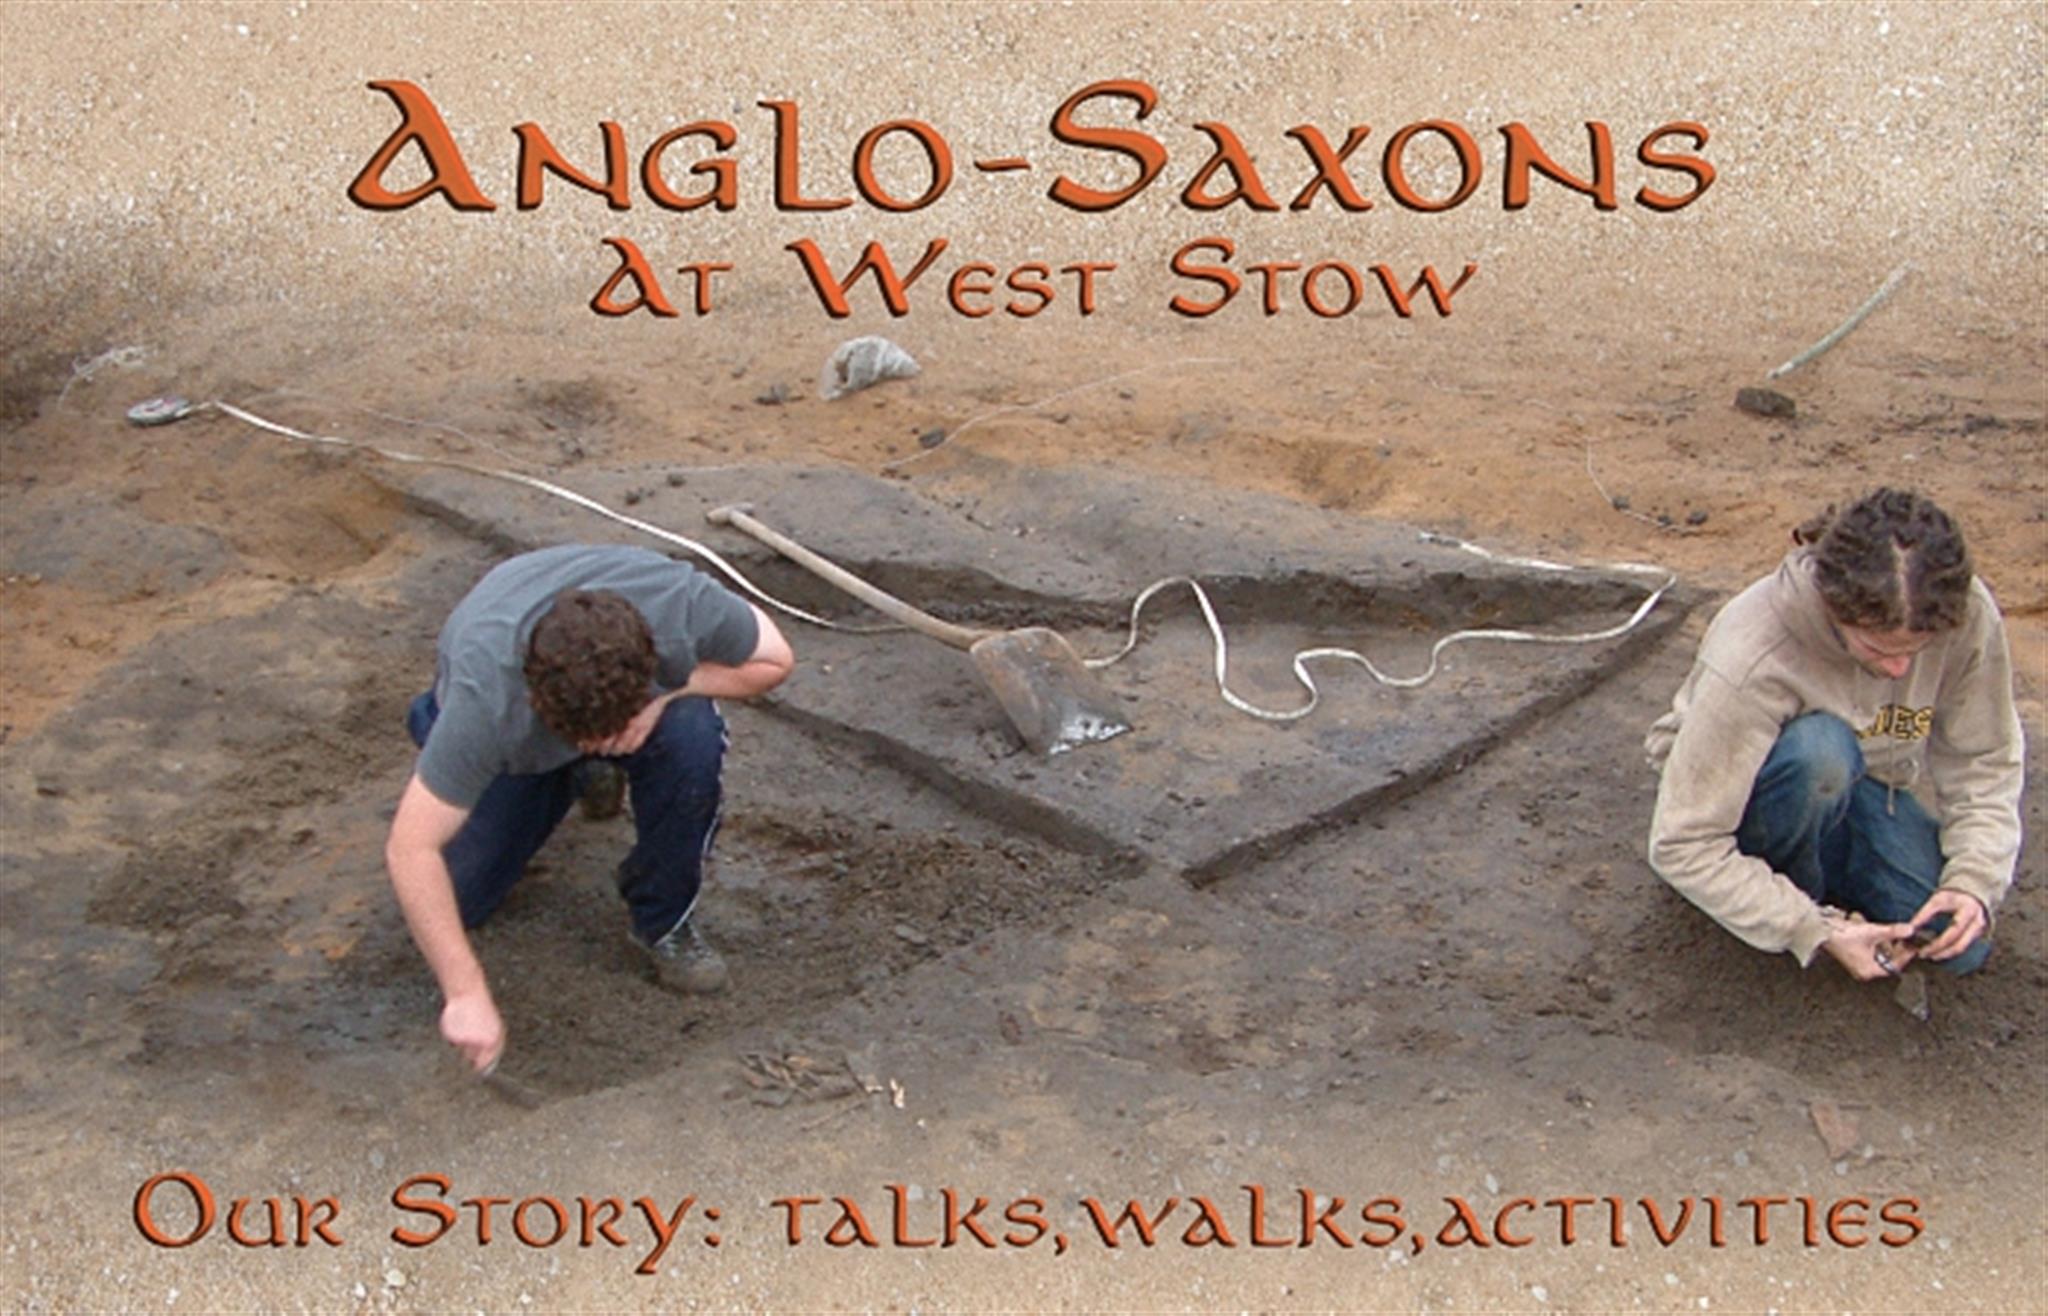 Anglo-Saxons at West Stow image